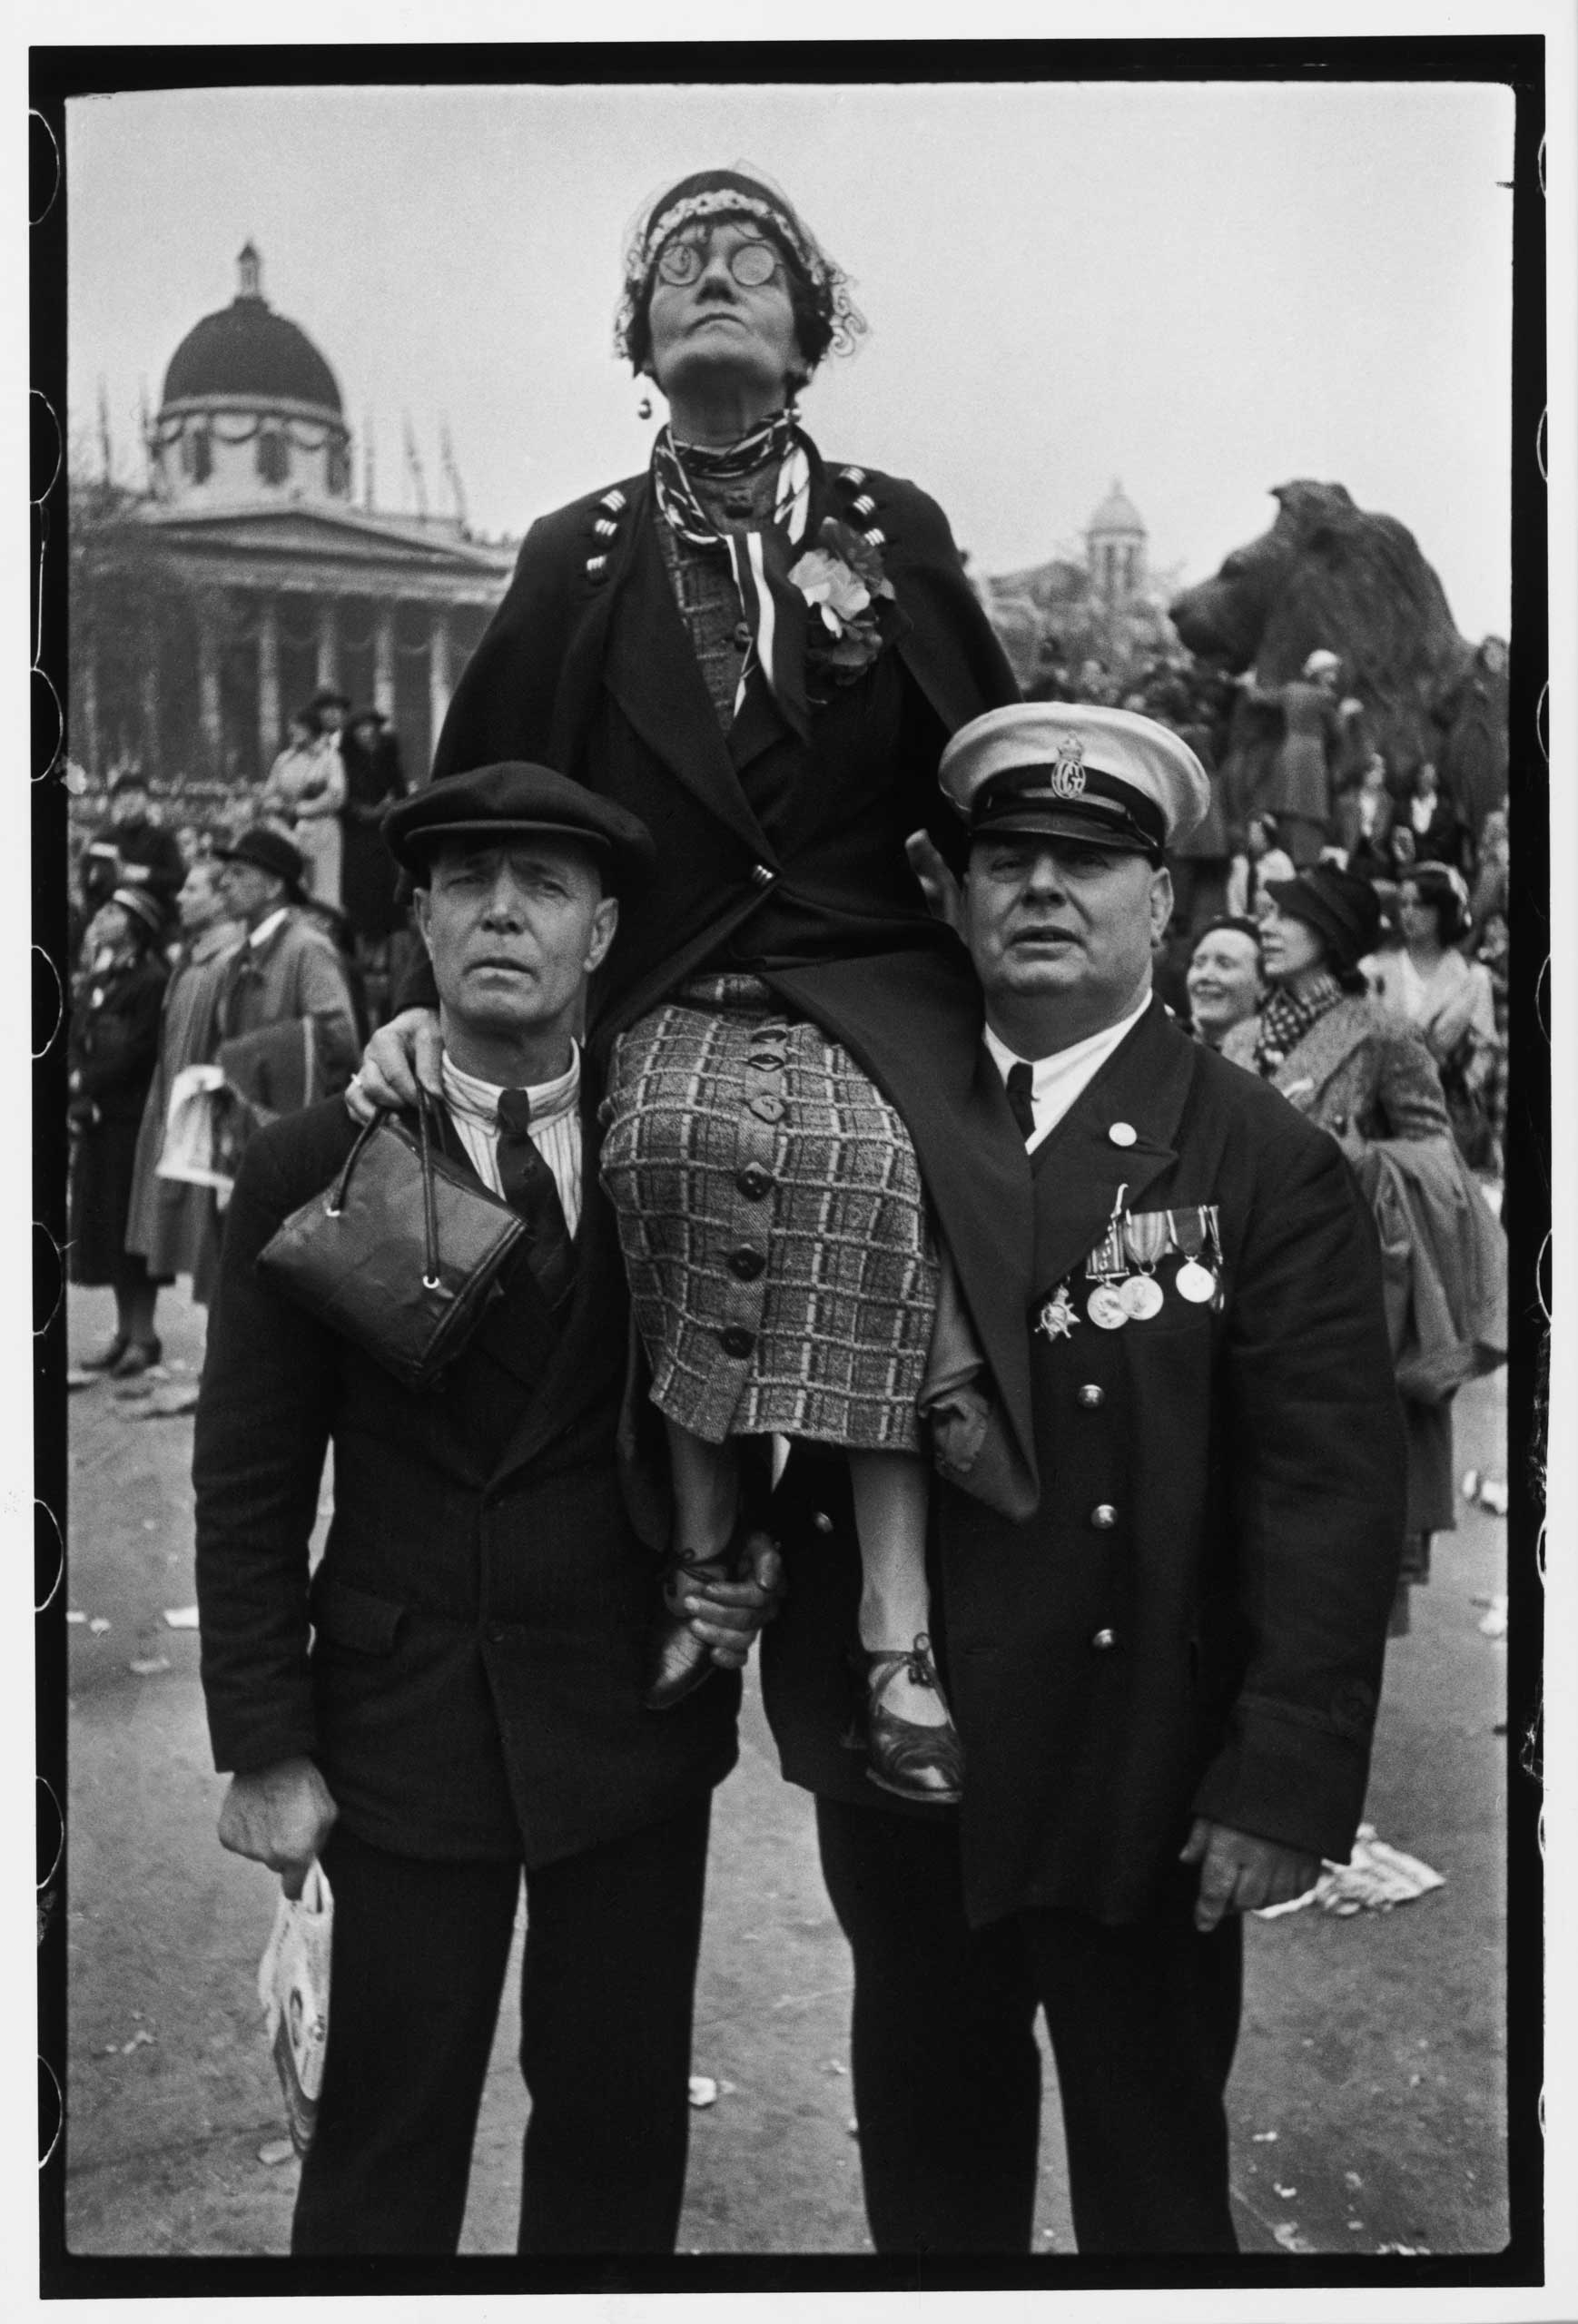 Waiting in Trafalgar Square for the coronation parade of King George VI. London, May 12, 1937.